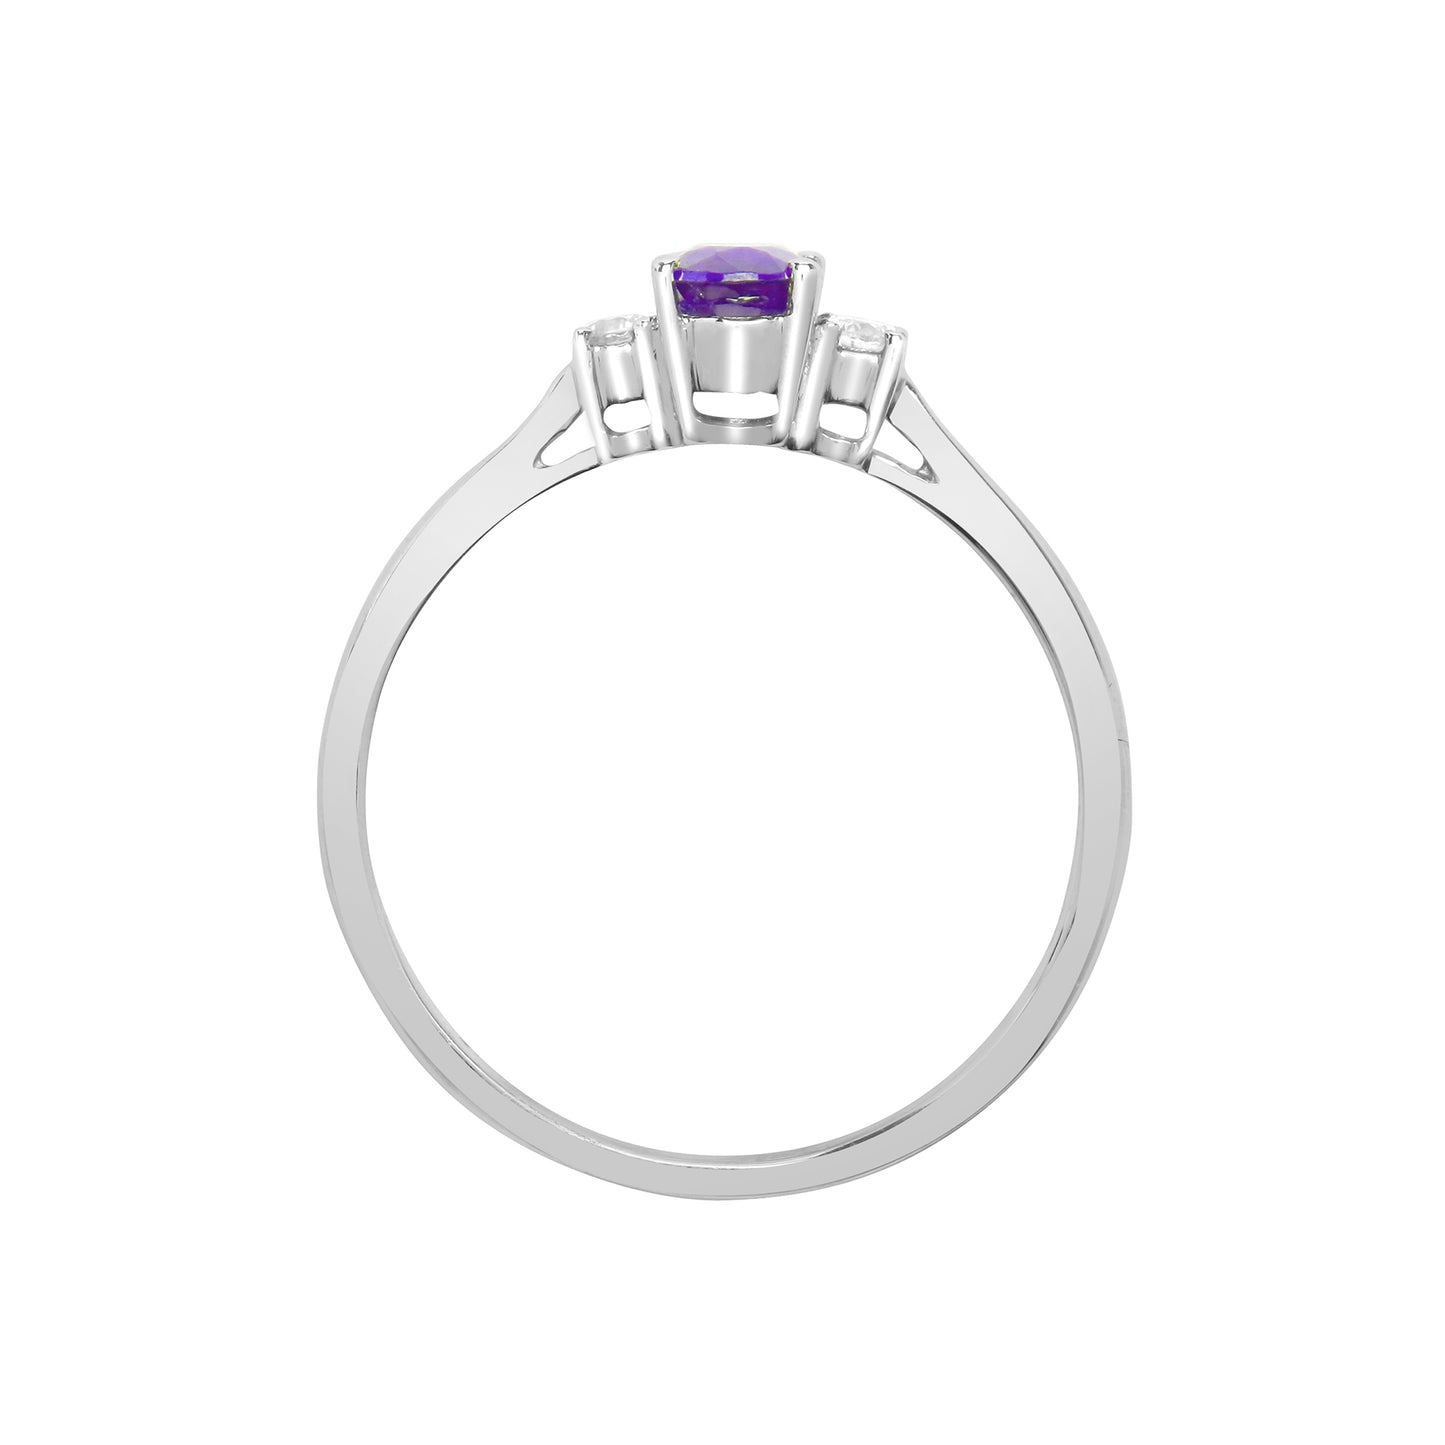 18ct White Gold  Diamond Amethyst Trilogy Engagement Ring 6mm - 18R633